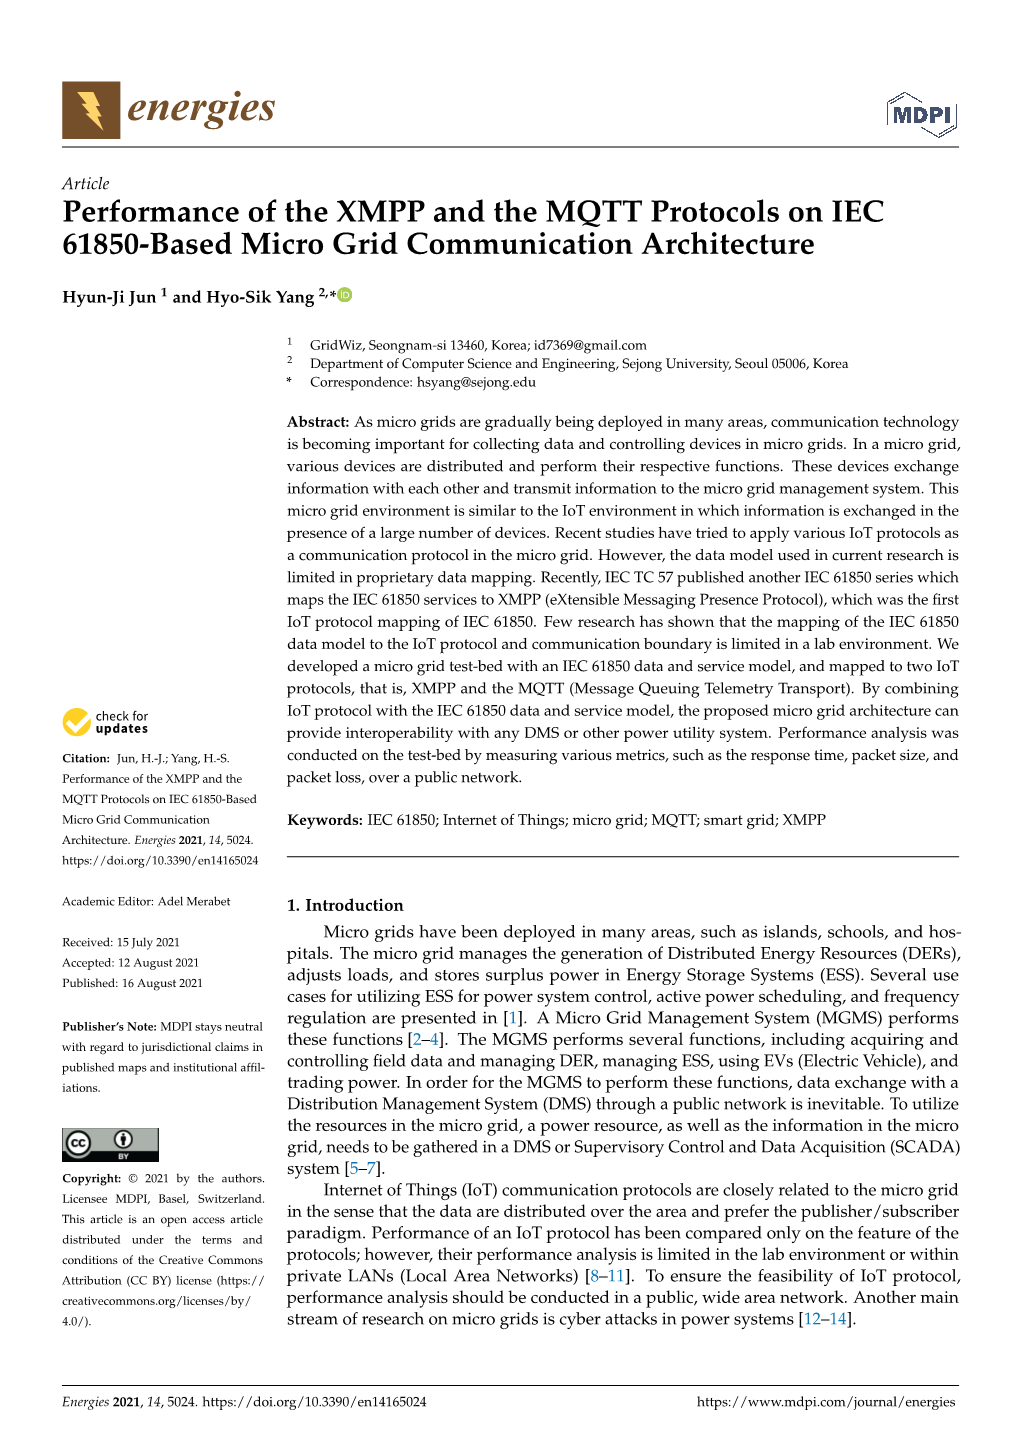 Performance of the XMPP and the MQTT Protocols on IEC 61850-Based Micro Grid Communication Architecture